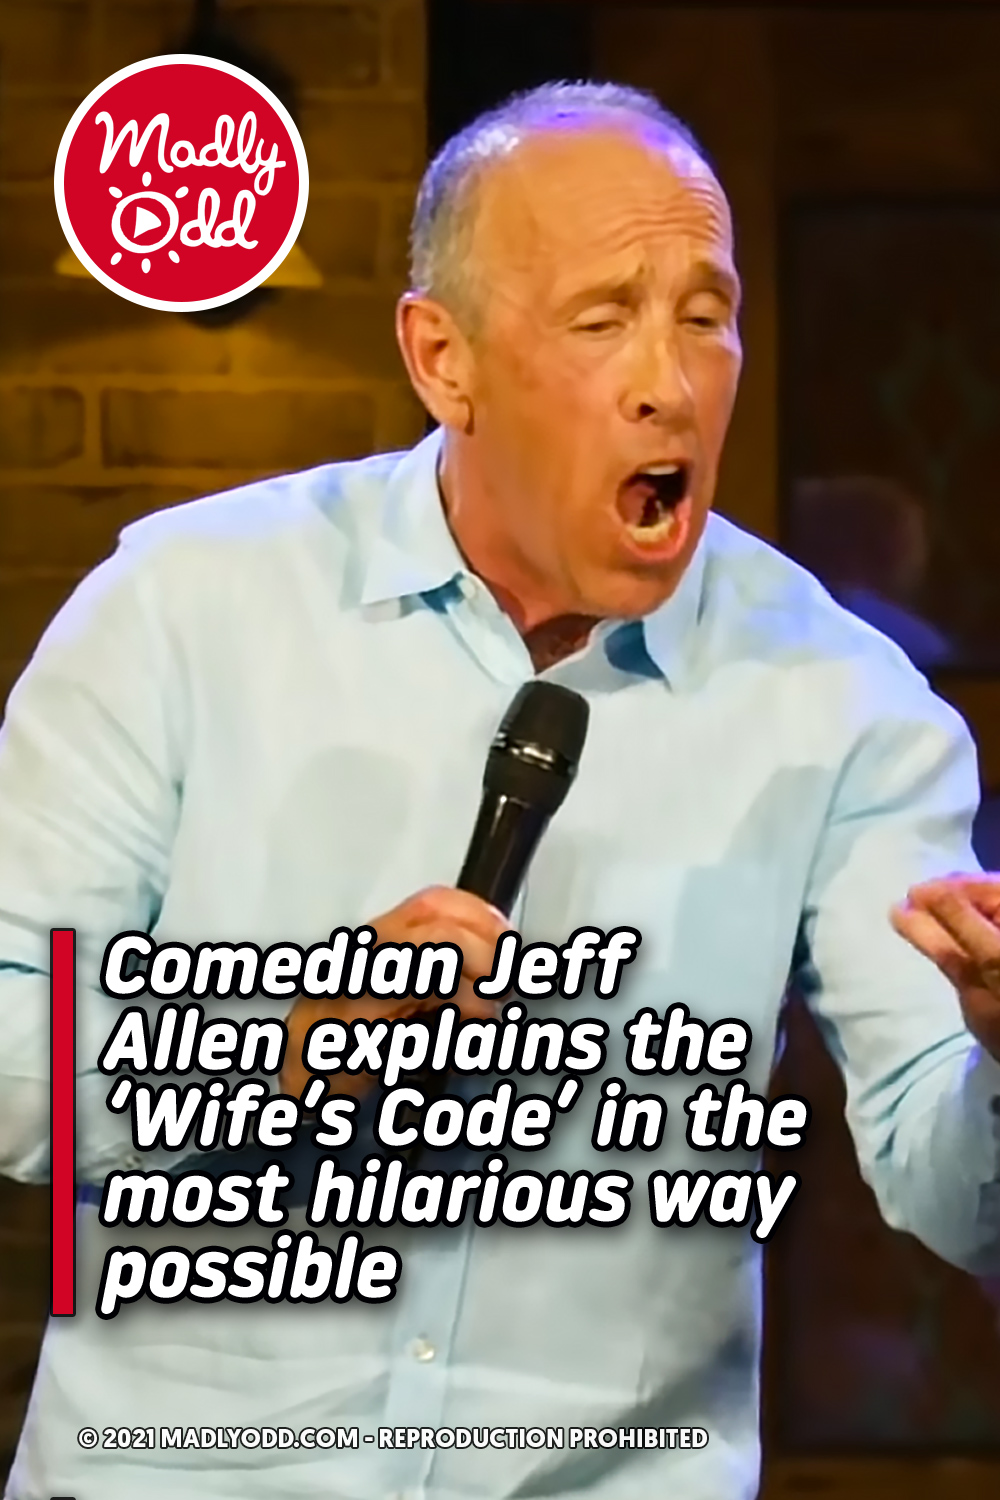 Comedian Jeff Allen explains the ‘Wife’s Code’ in the most hilarious way possible